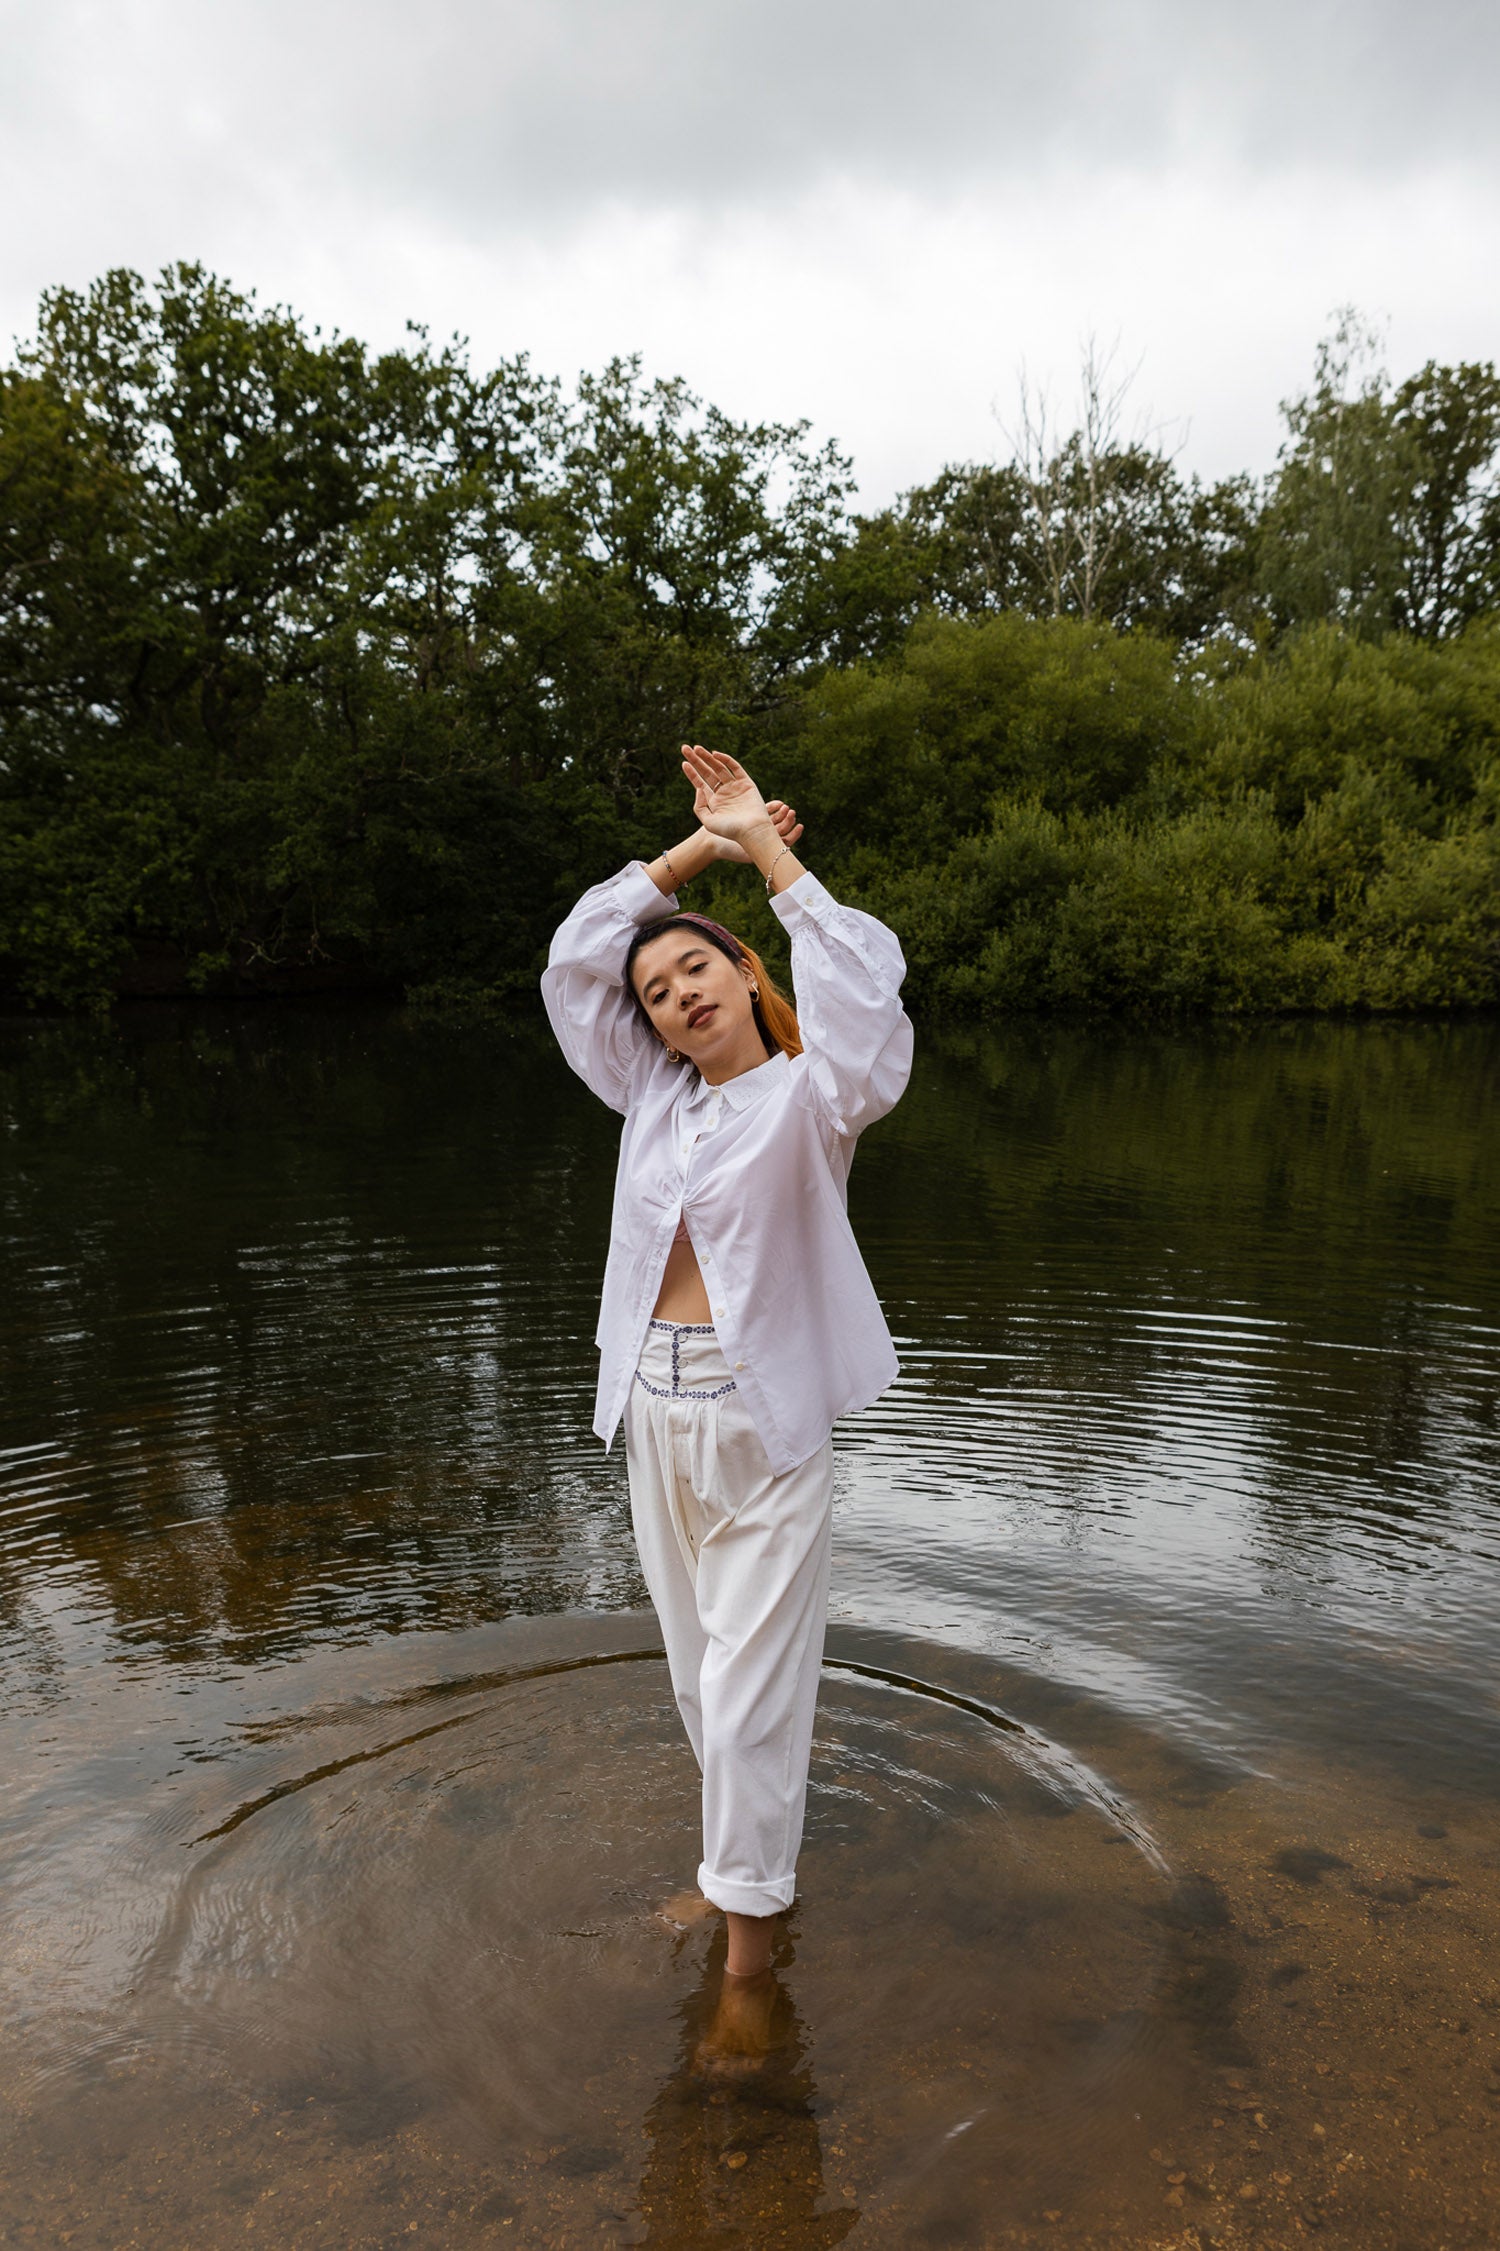 Model stands in a lake, surrounded by trees, with her hands above her head. She wears Saywood's Edi Volume Sleeve Shirt in white cotton bamboo, with the red check Heidi Headband in her hair. Her eyes are closed and she smiles softly.